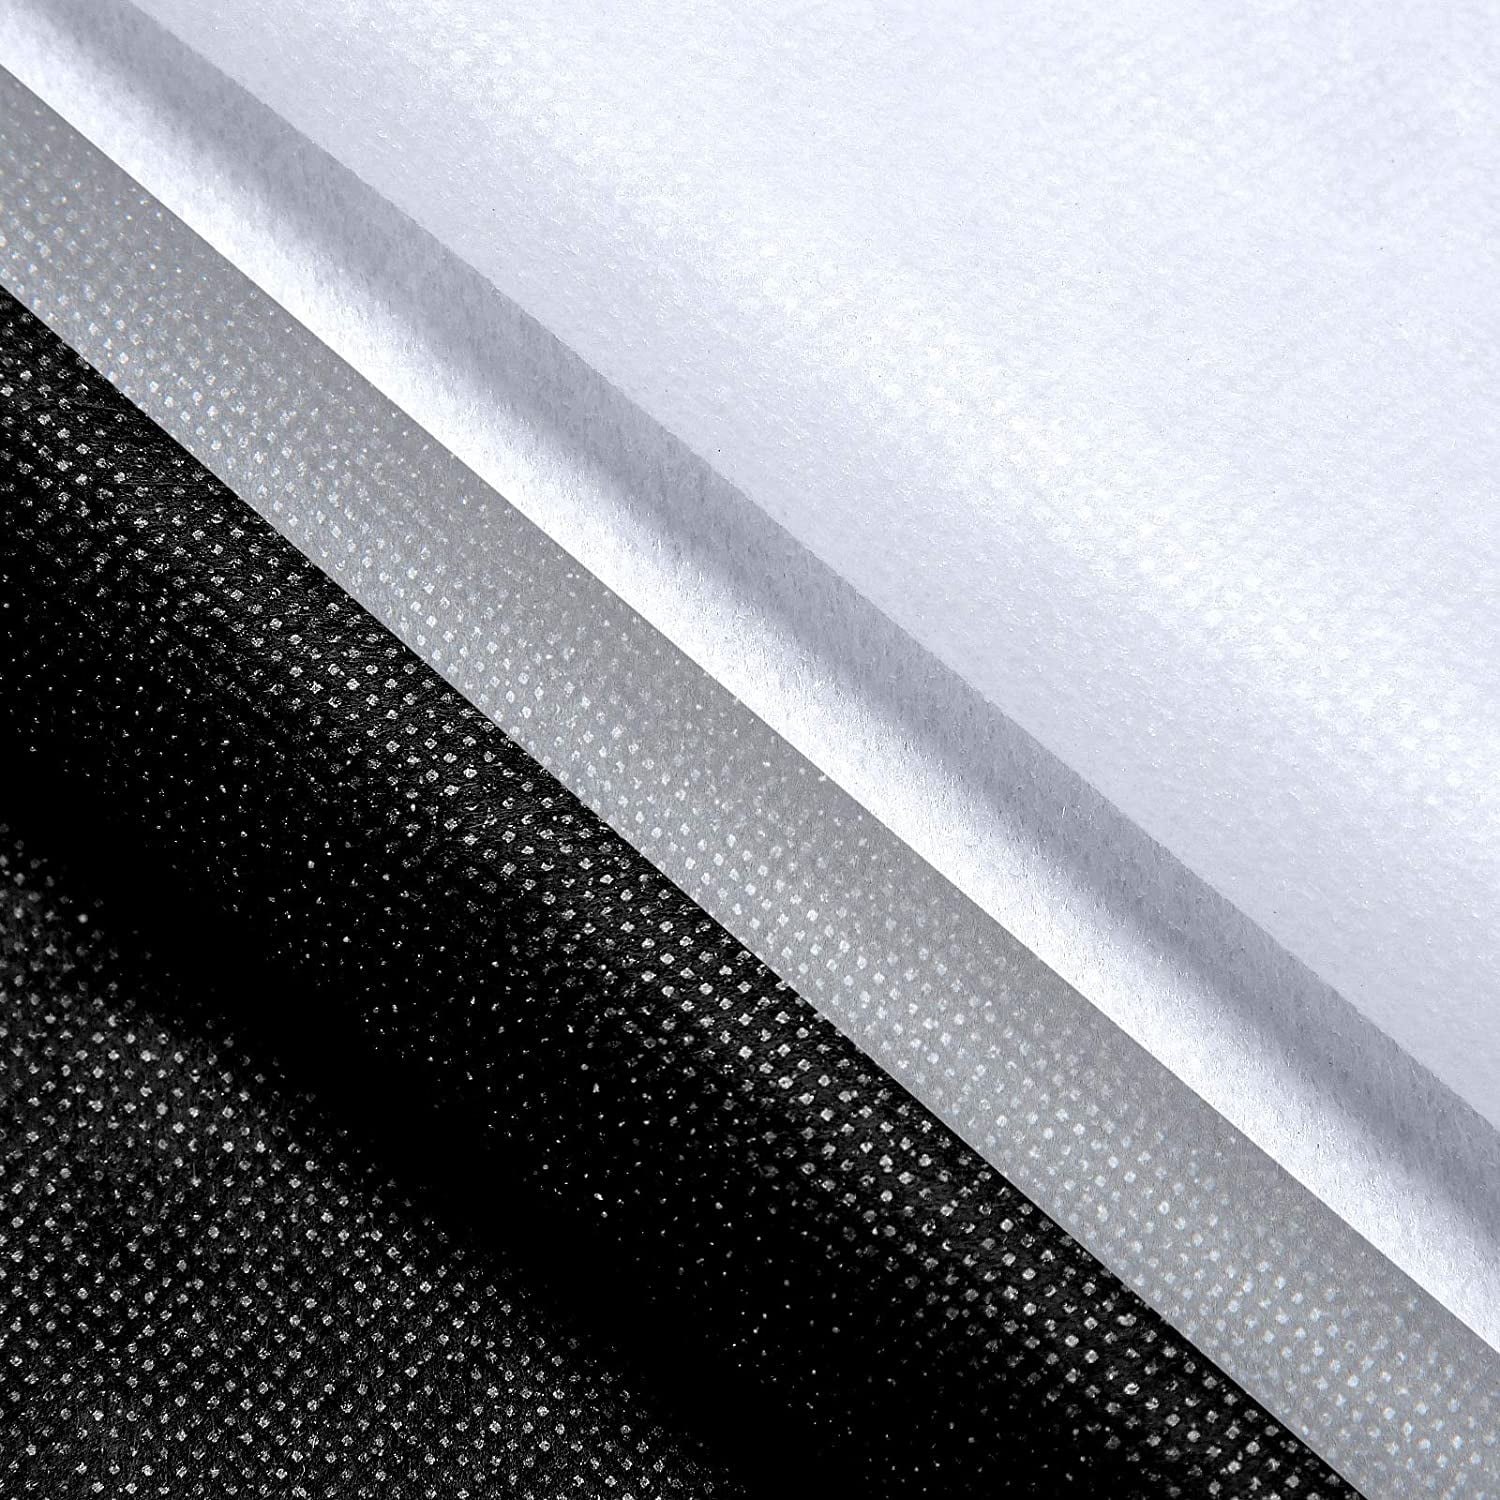 2 Pieces White and Black Fusible Interfacing Lightweight Non-Woven Polyester Interfacing Non-Adhesive Single-Sided Iron on Interfacing for Handwork DIY Craft Supplies 50 x 280 cm 